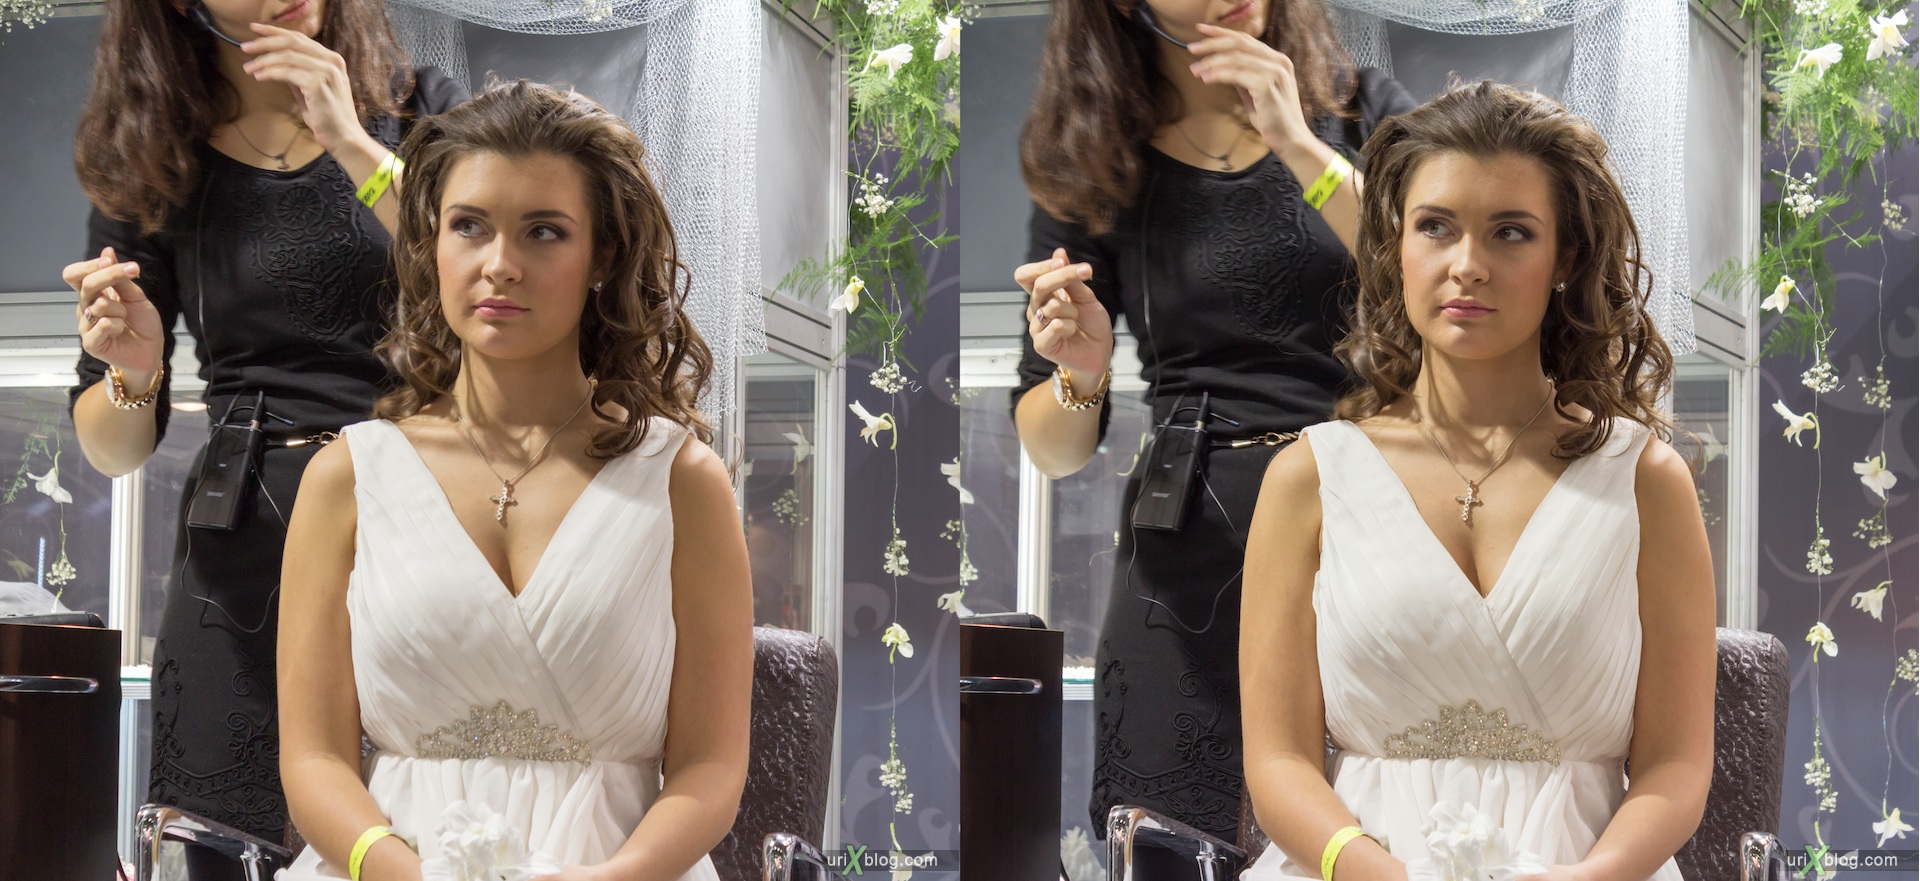 2012, interCharm exhibition, Crocus Expo, Moscow, girls, models, 3D, stereo pair, cross-eyed, crossview, cross view stereo pair